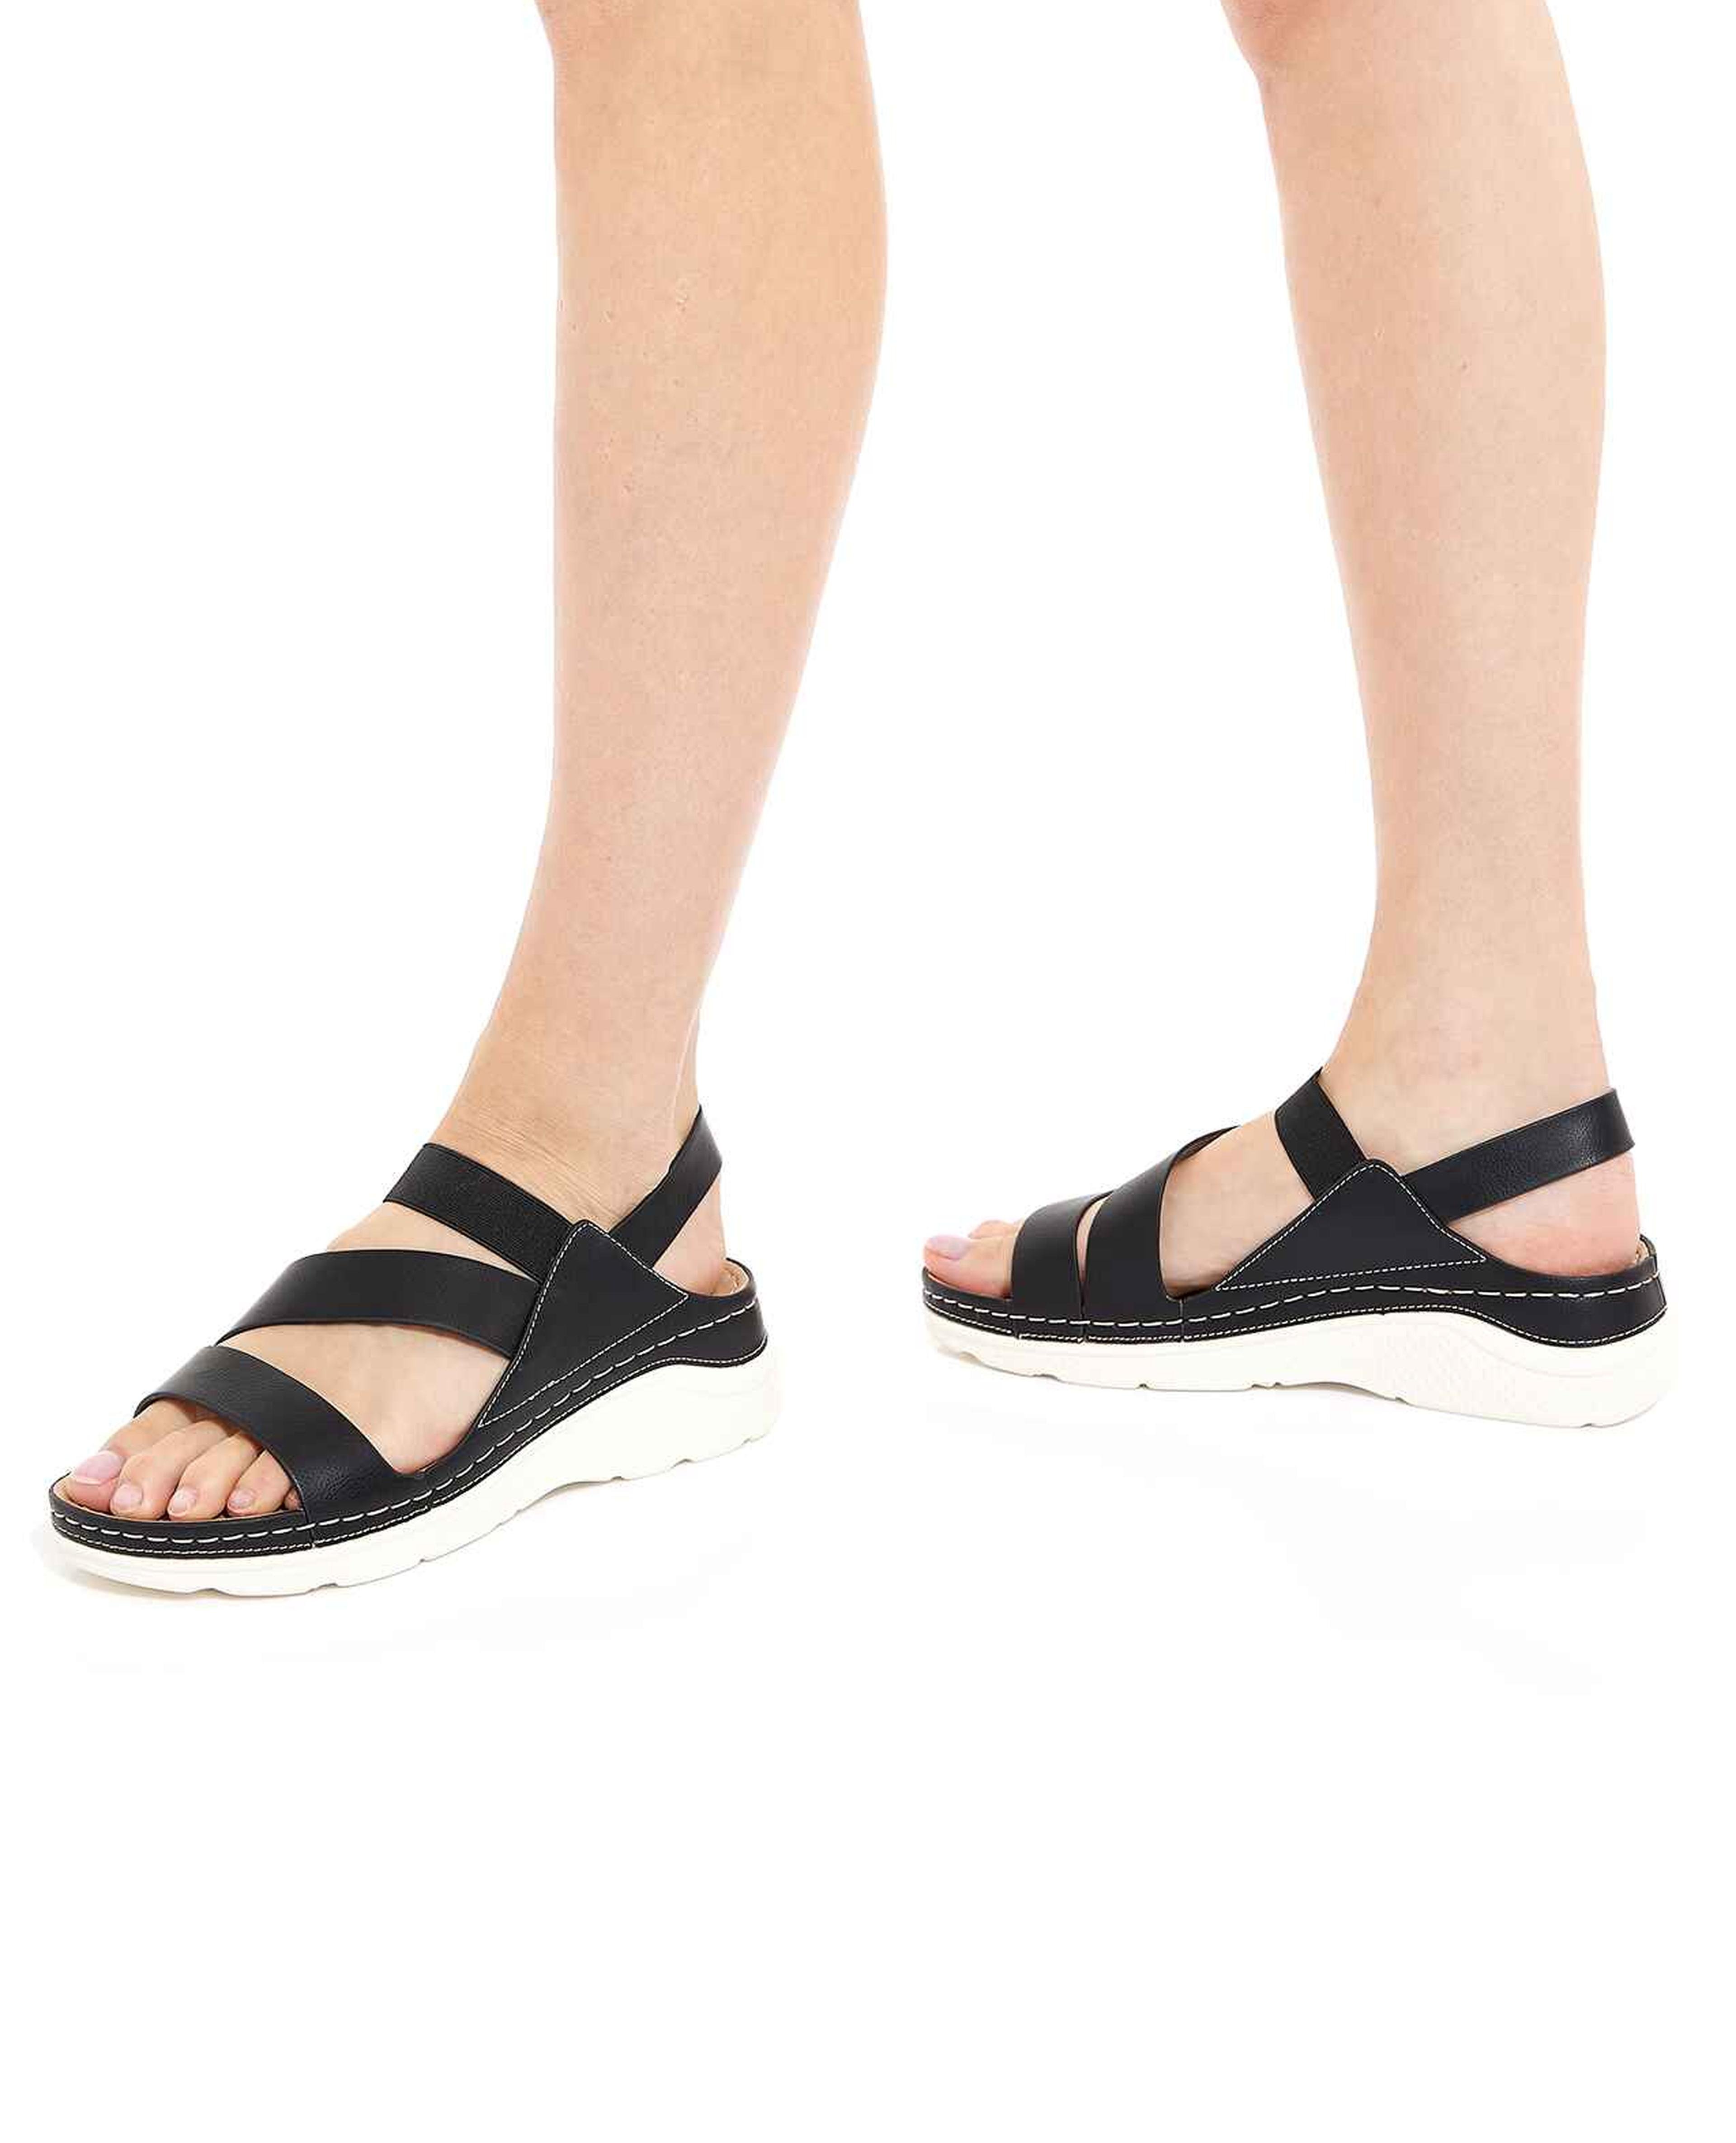 Strappy Slingback Sandals